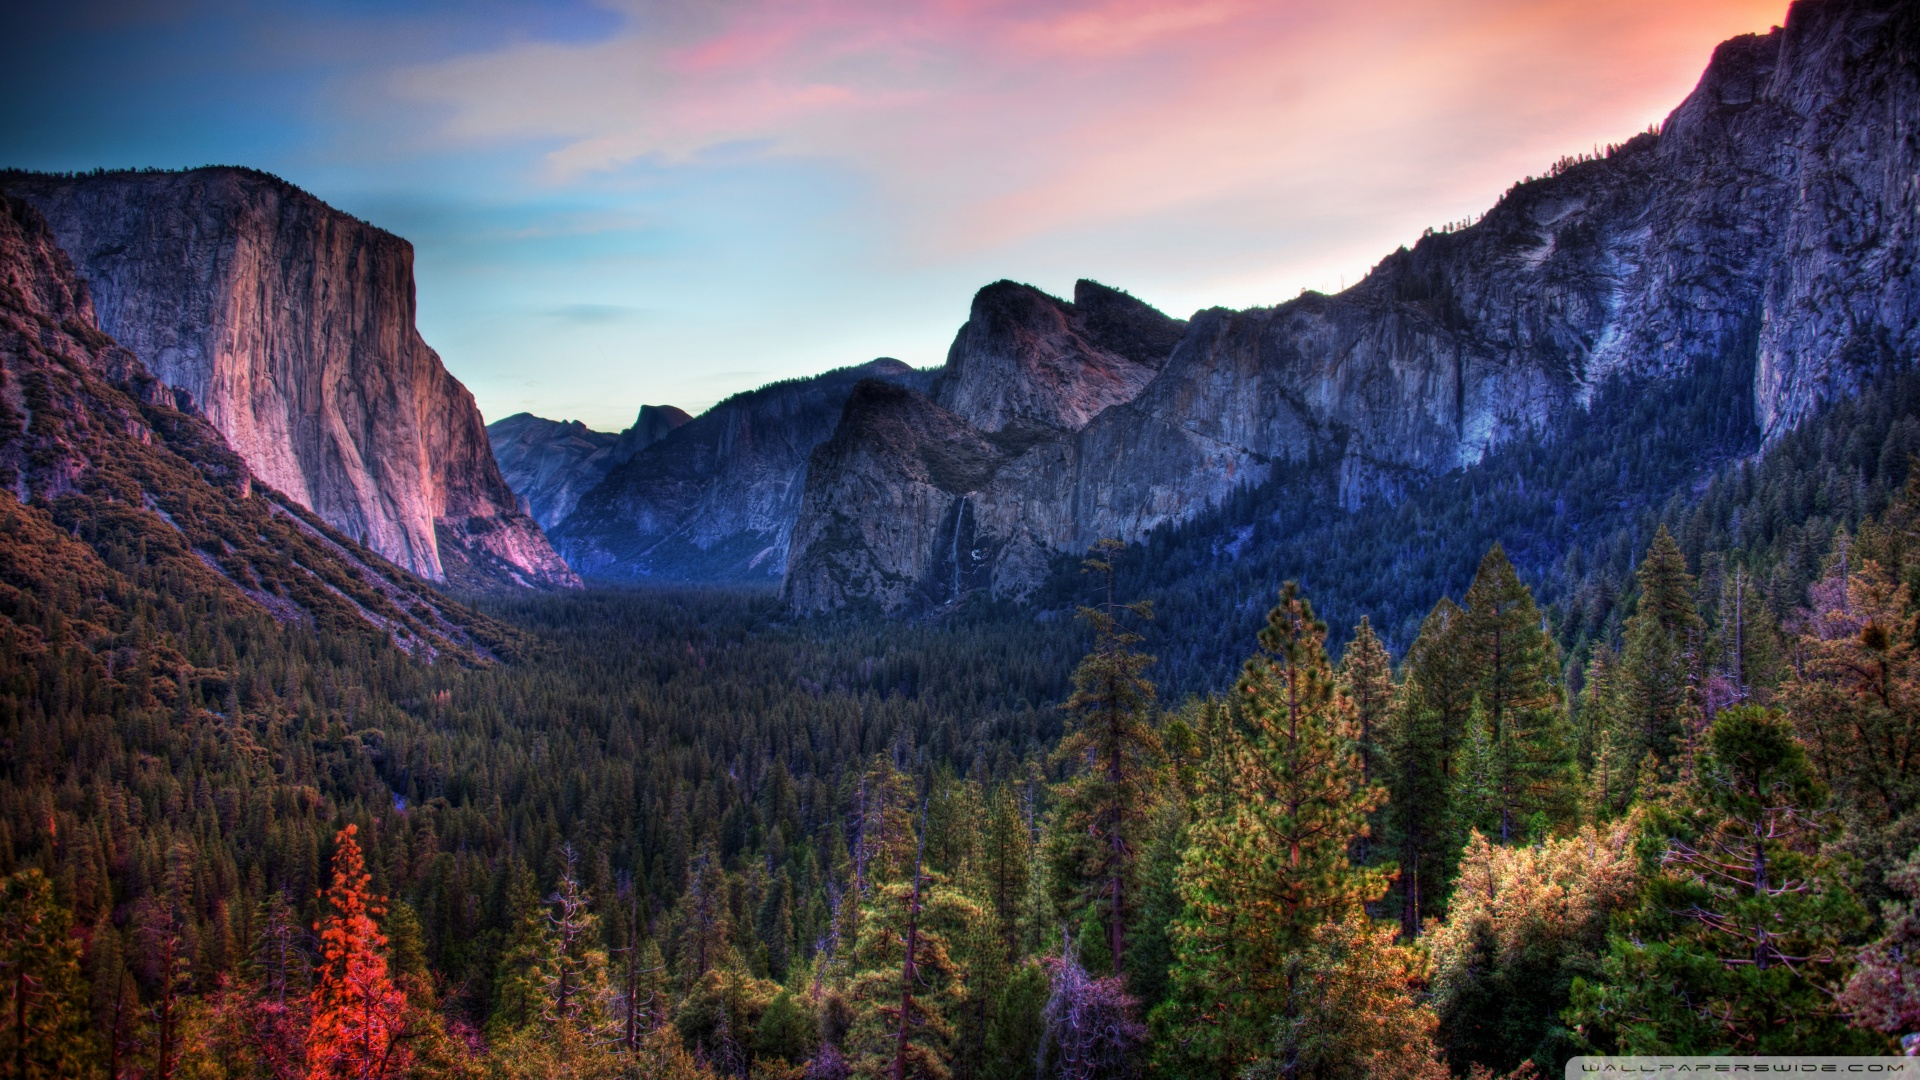 1920x1080 Free download time get your big and beautiful OS X El Capitan wallpapers here [] for your Desktop, Mobile \u0026 Tablet | Explore 47+ OS X El Capitan Wallpapers | Mac Os